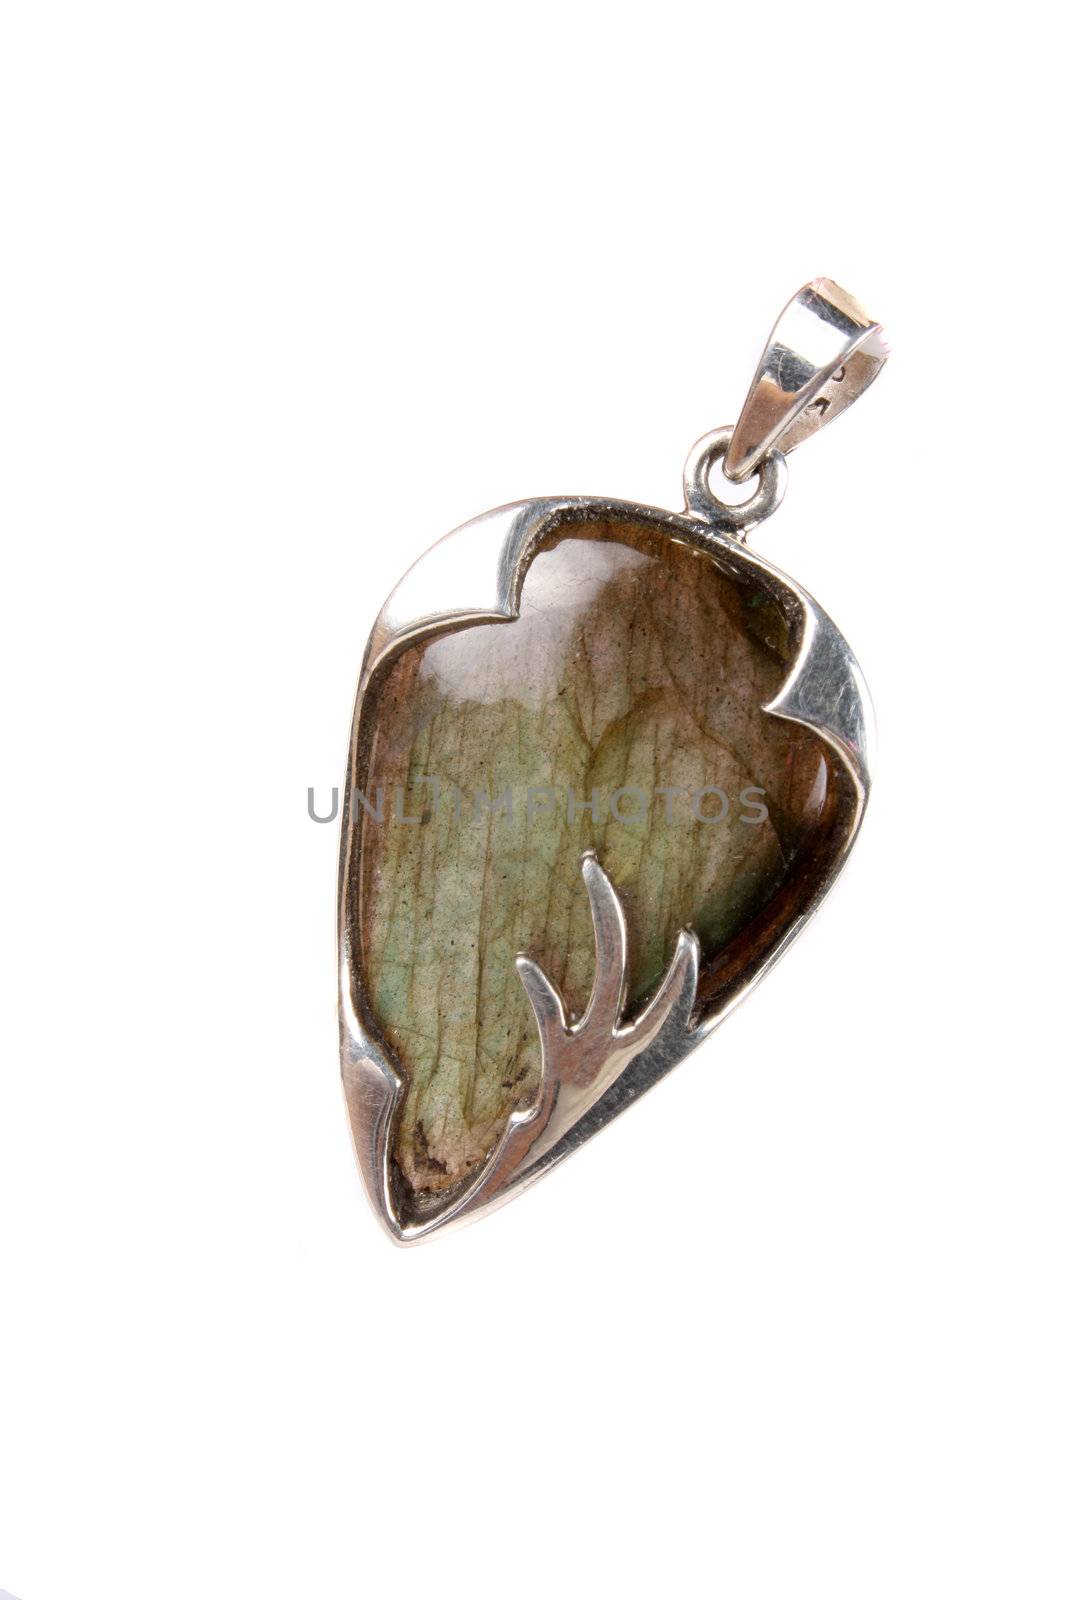 A labradorite pendant made of silver used as jewelery or in alternative therapies like crystal healing and astrology, isolated on white studio background.